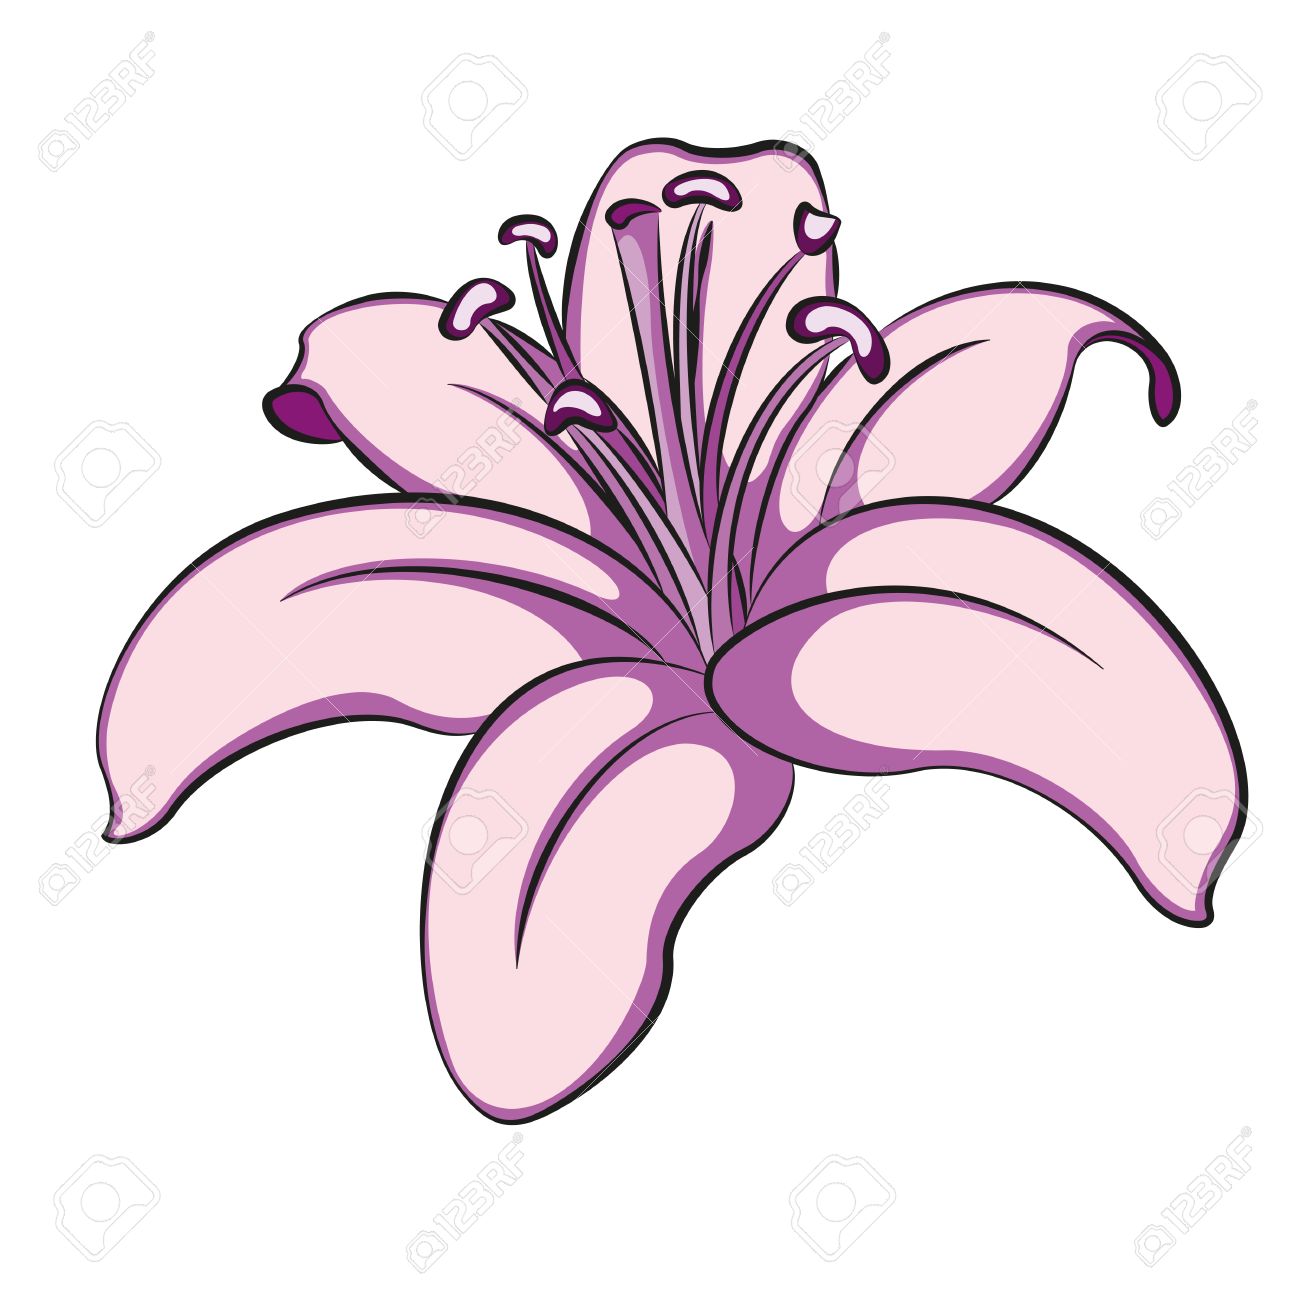 Free lily clipart public doma